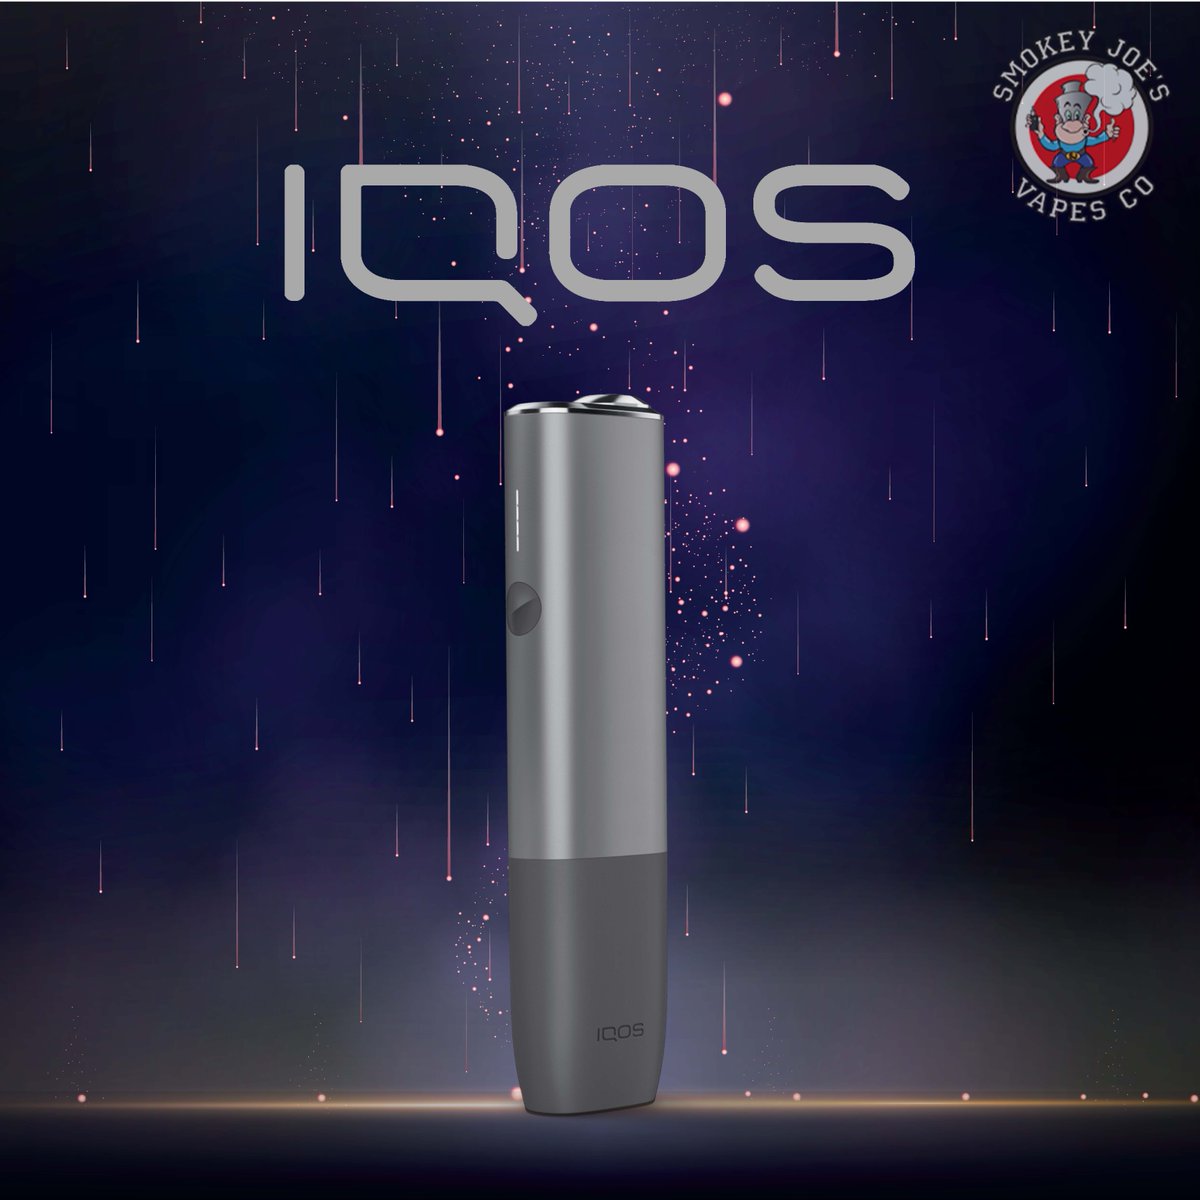 IQOS ILUMA is a heated tobacco device that uses a bladeless SMARTCORE INDUCTION SYSTEM™ to heat tobacco from within the TEREA stick.#heatedtobacco #iqos #heatnotburn #cigarette #vaping #vape #tobacco #heatnoburn #heets #instavaperz #vapeon #vaper  smokeyjoesvapes.com/search?type=pr…